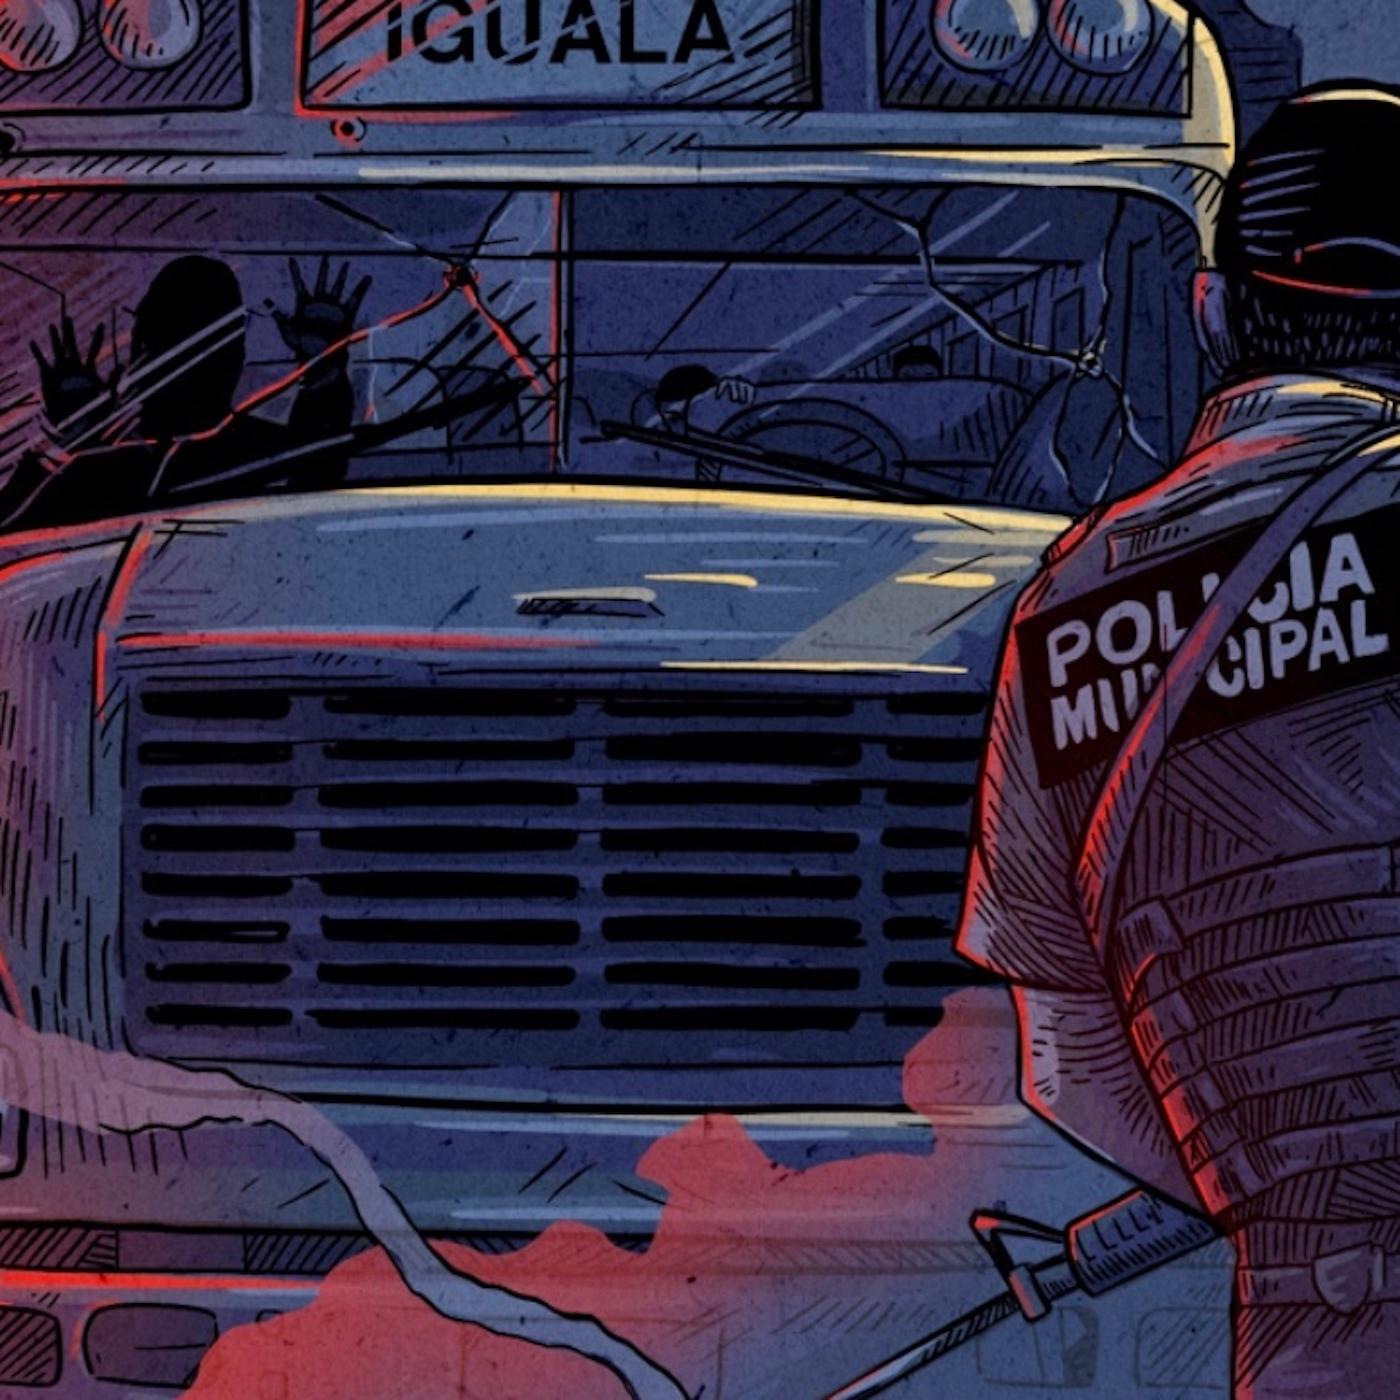 Thumbnail for "After Ayotzinapa Chapter 1: The Missing 43".